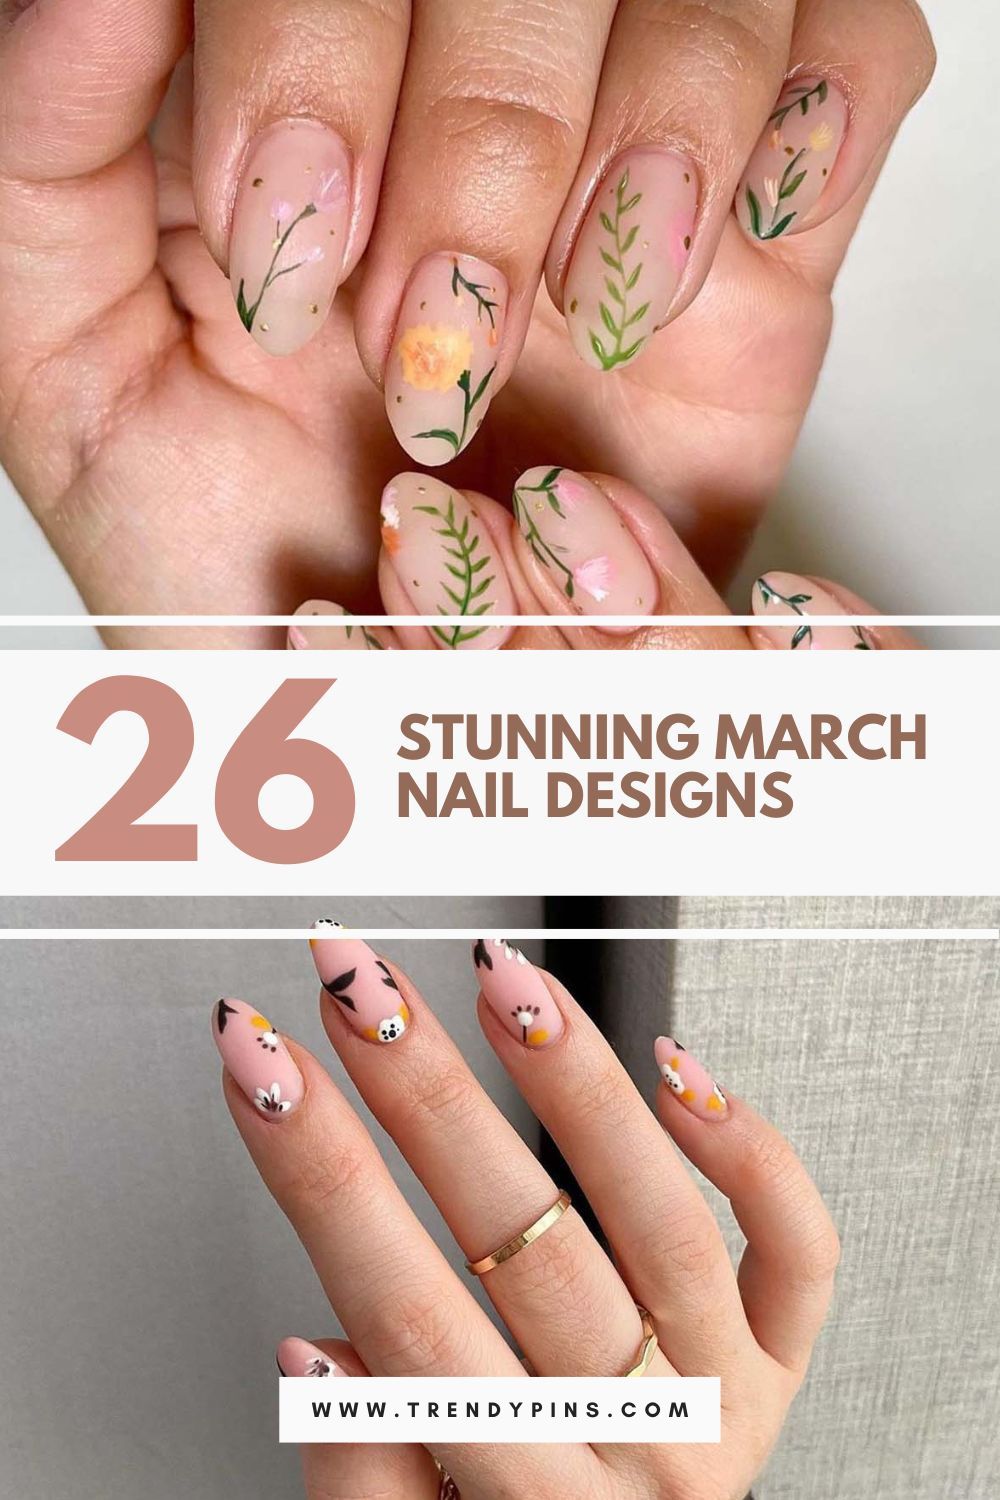 Best Of March Nail Designs 1